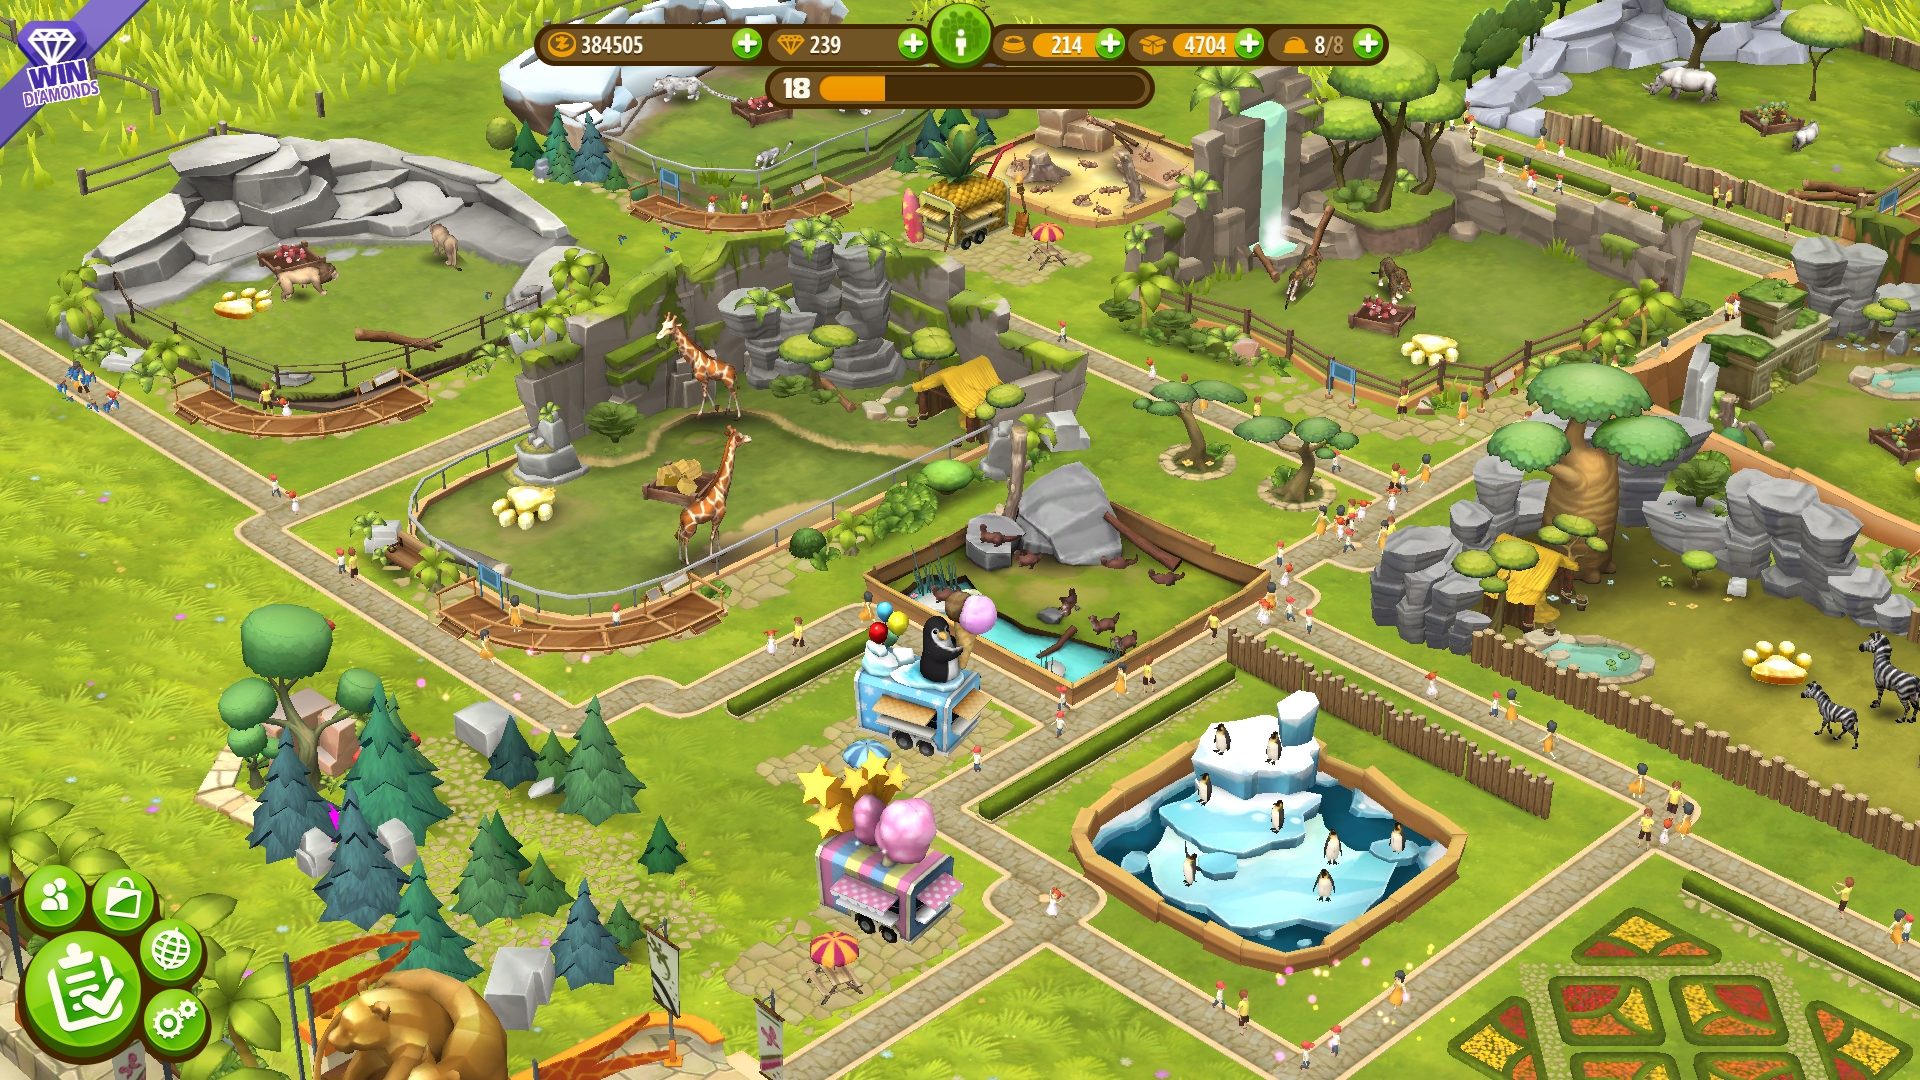 Zoo Tycoon Friends lets you transfer progress from your PC to your Windows Phone, coming out this summer